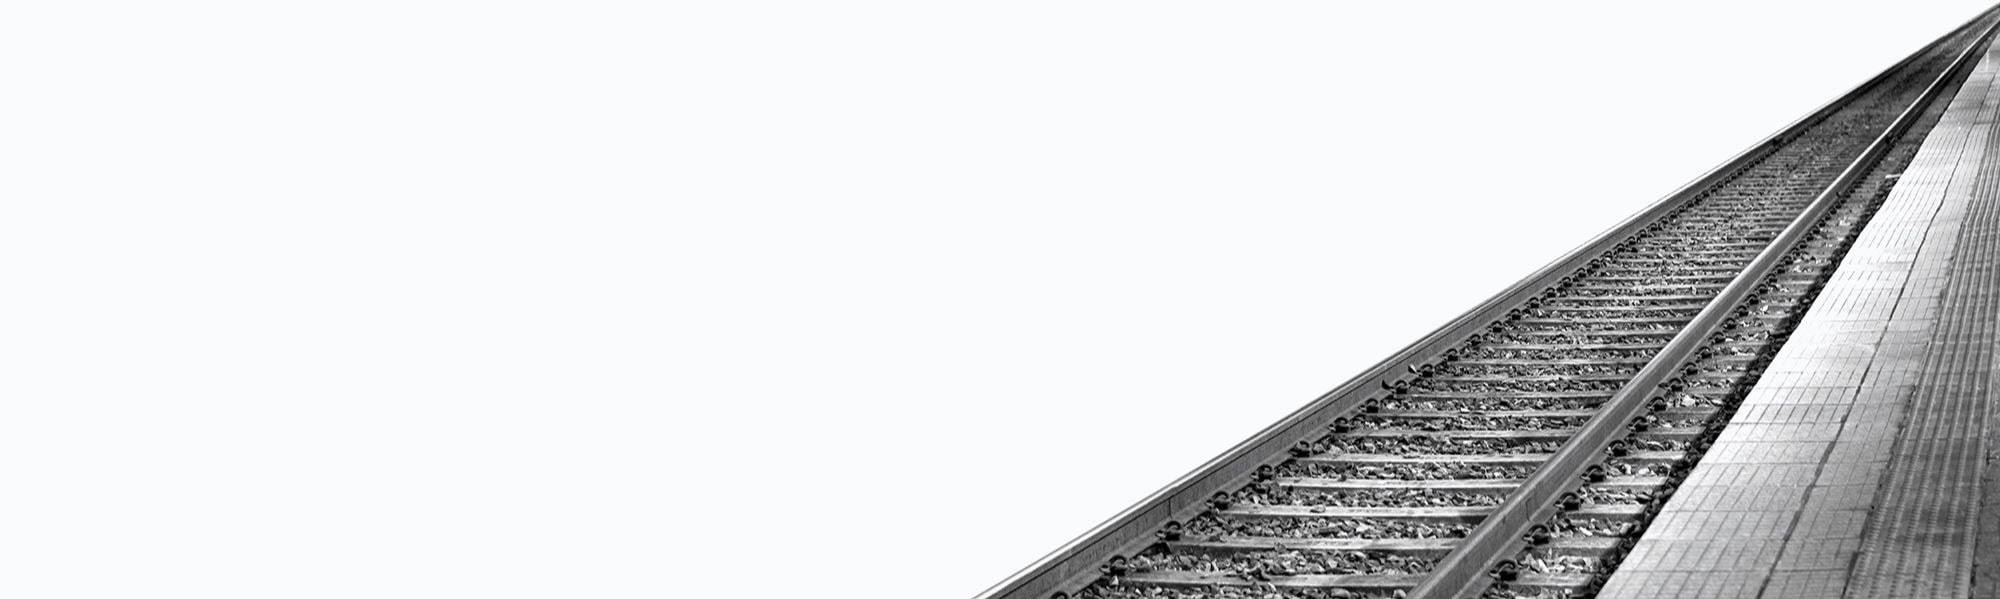 Banner image of a railway line and tracks with a white background